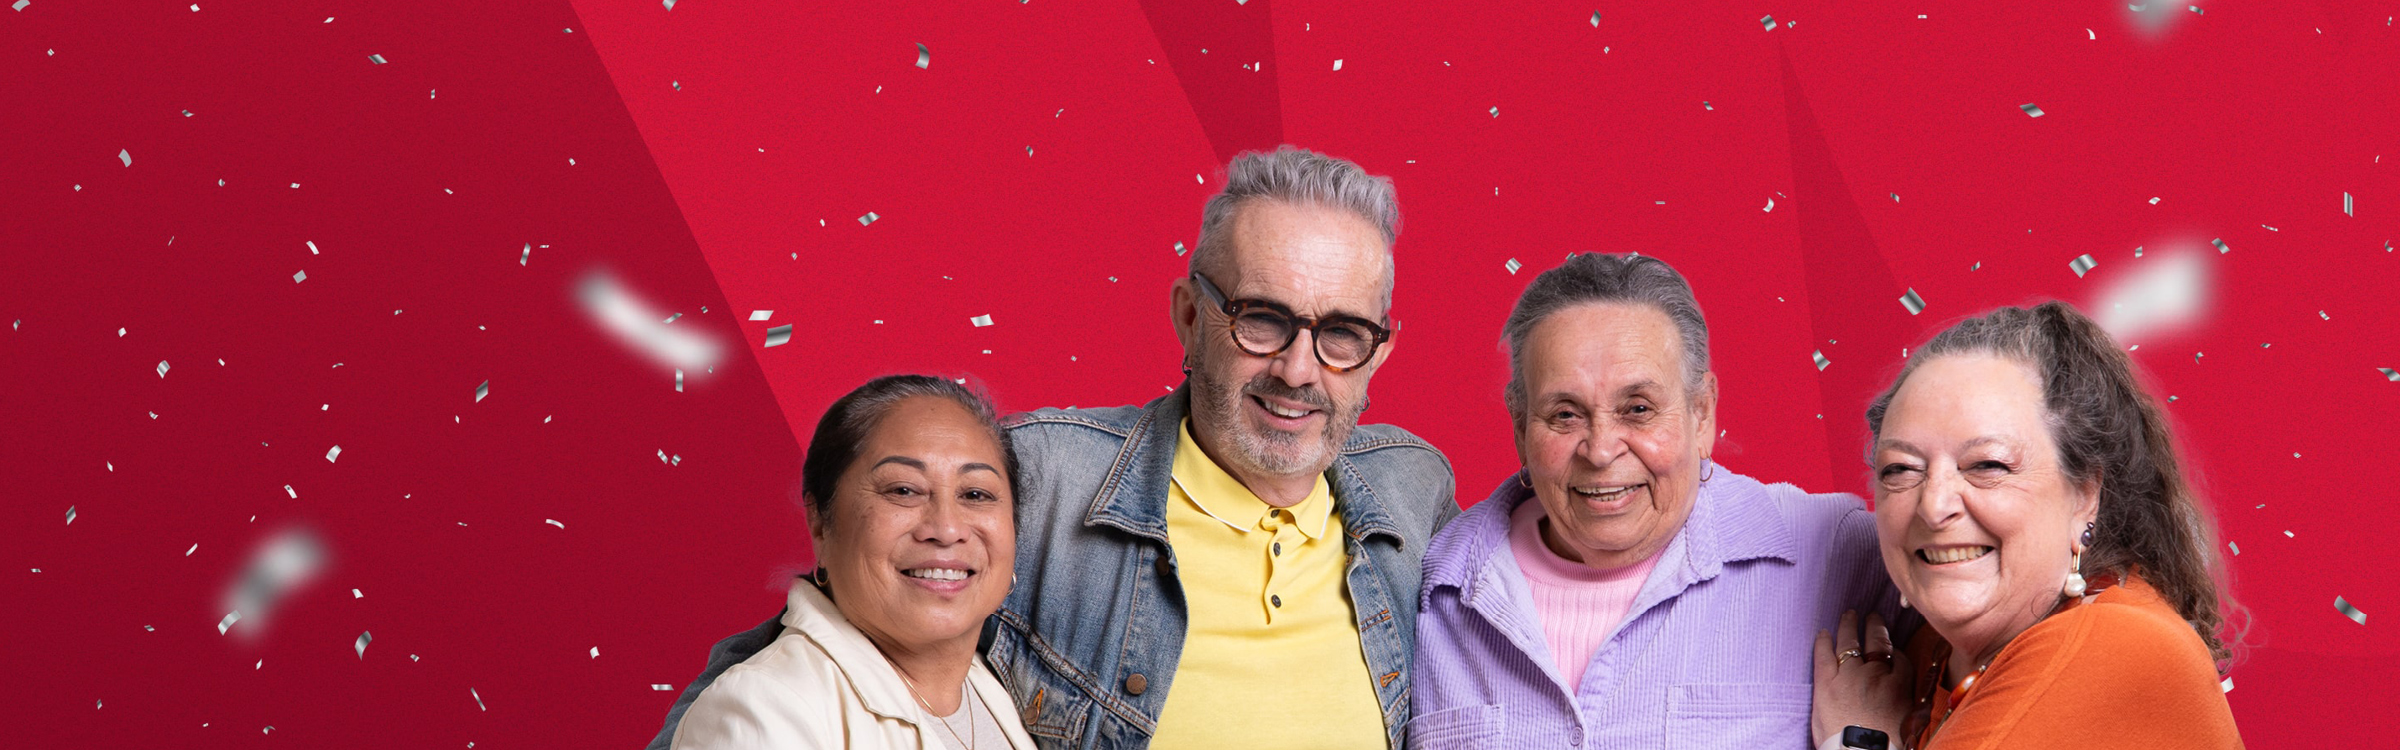 Older people smiling on a red background